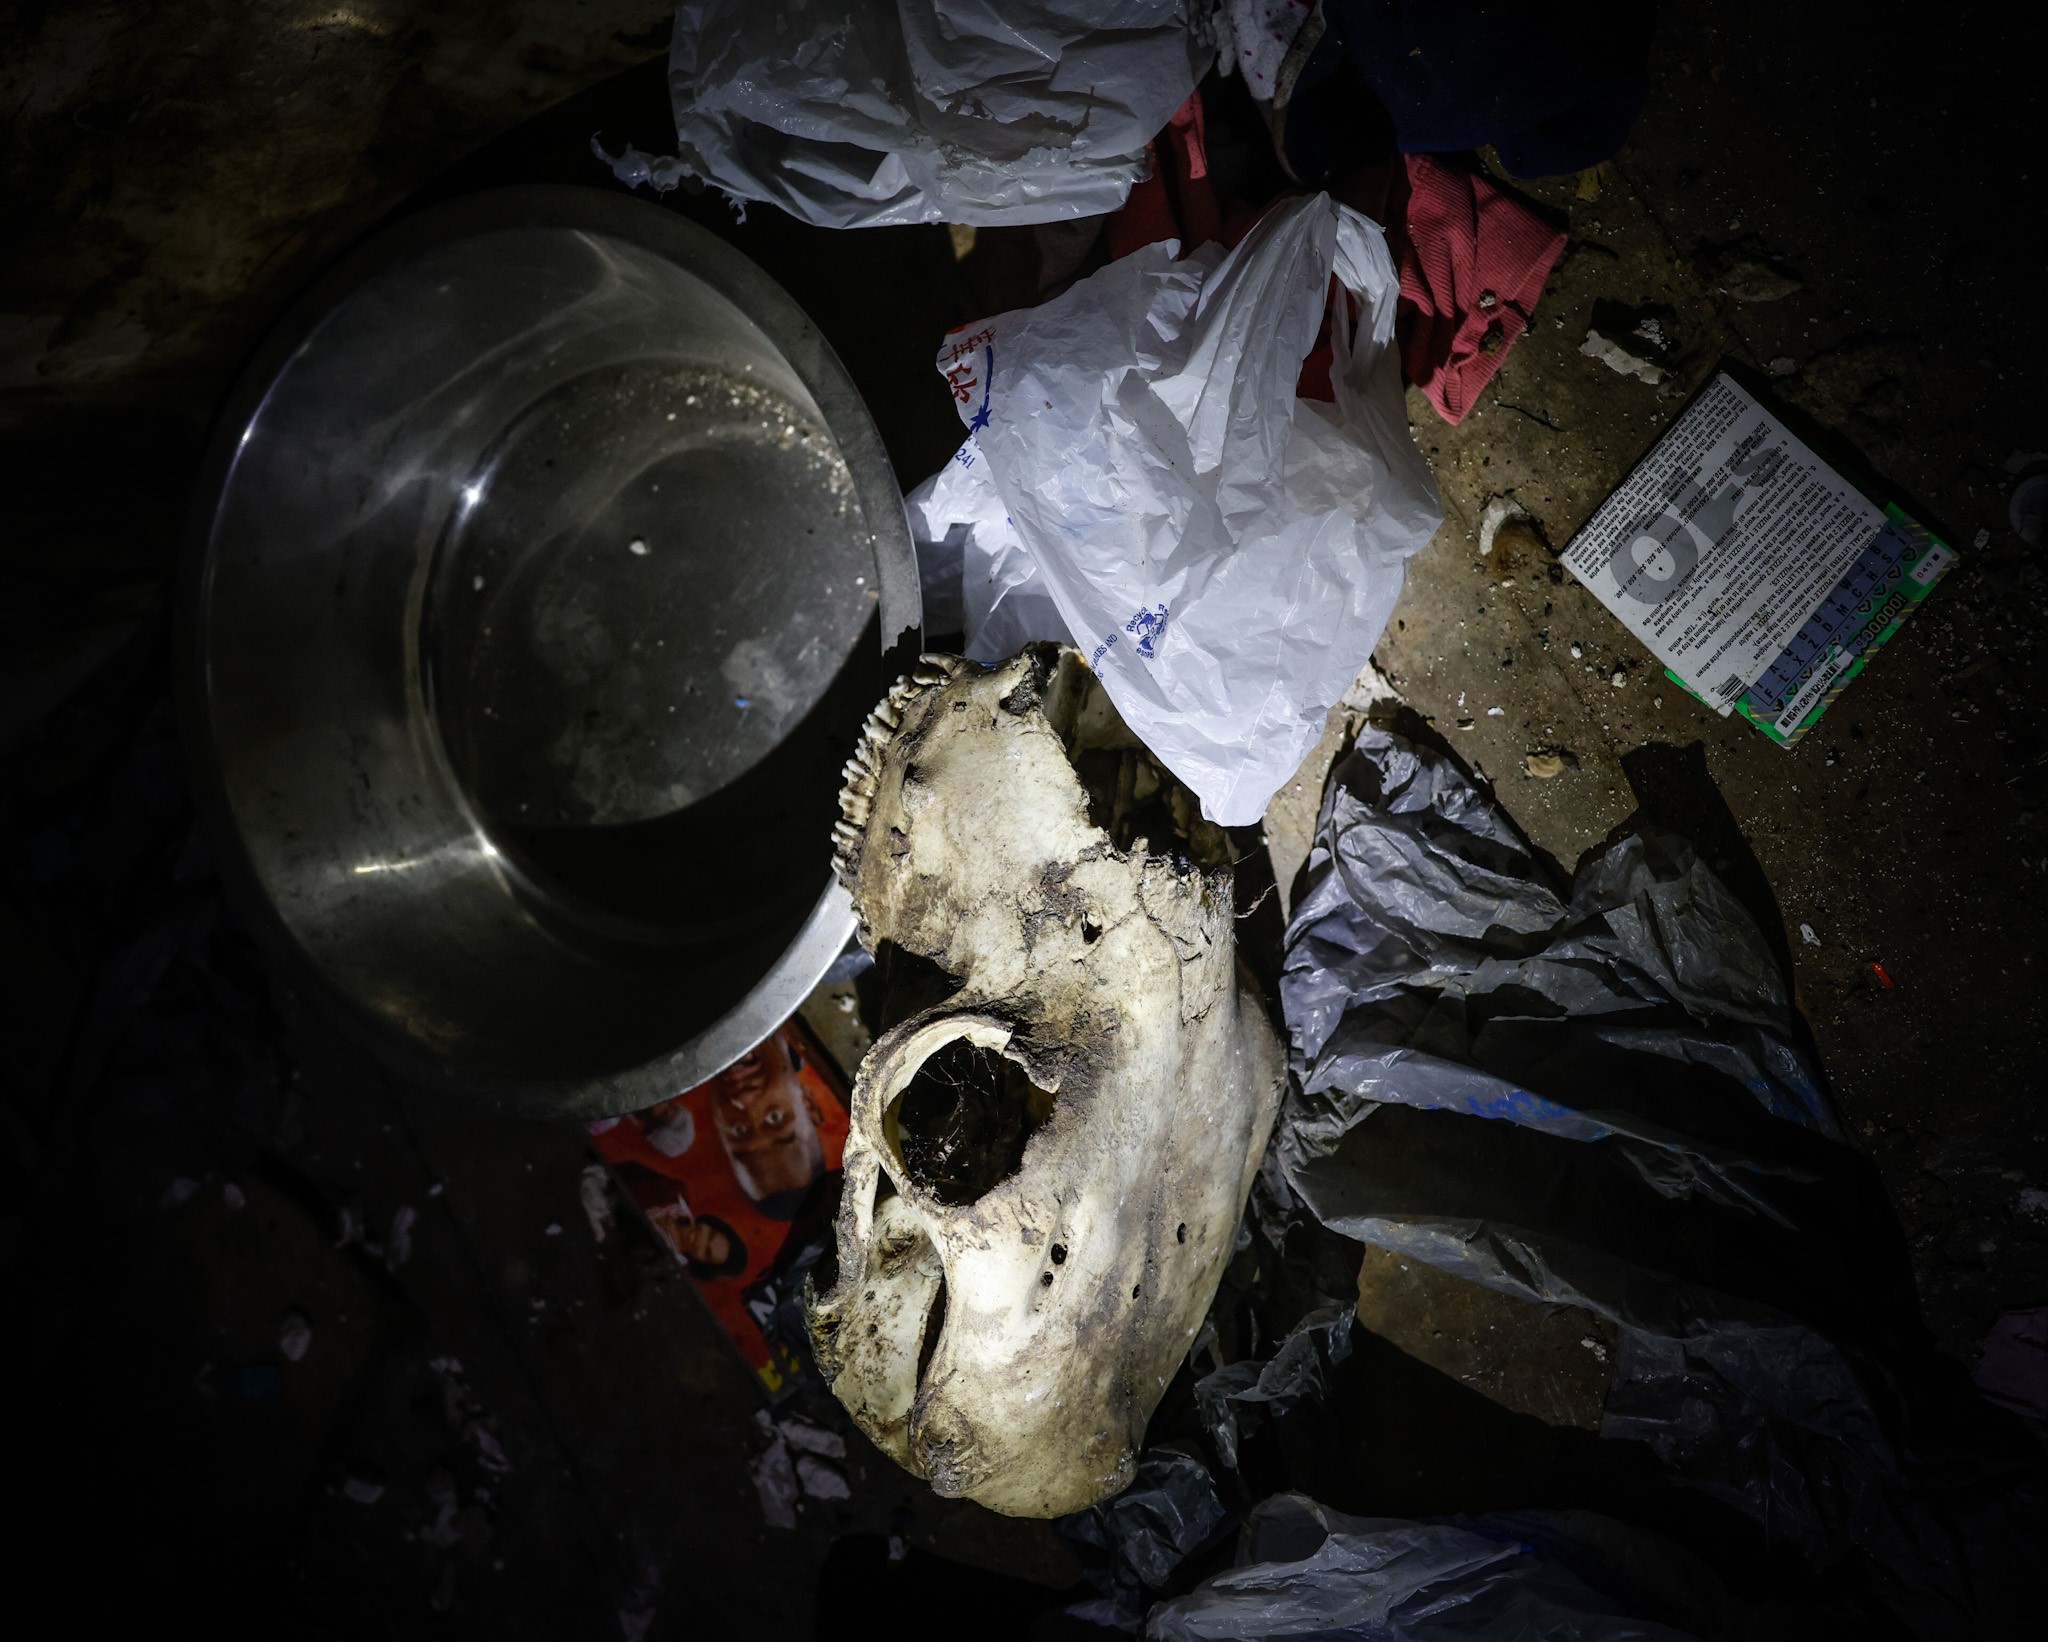 A cow skull was found in a nuisance house on Chapel St.  in Old North Dayton Tuesday June 21. The house was filled with dog cages potentially used to hold dogs for fighting, JIM NOELKER / STAFF